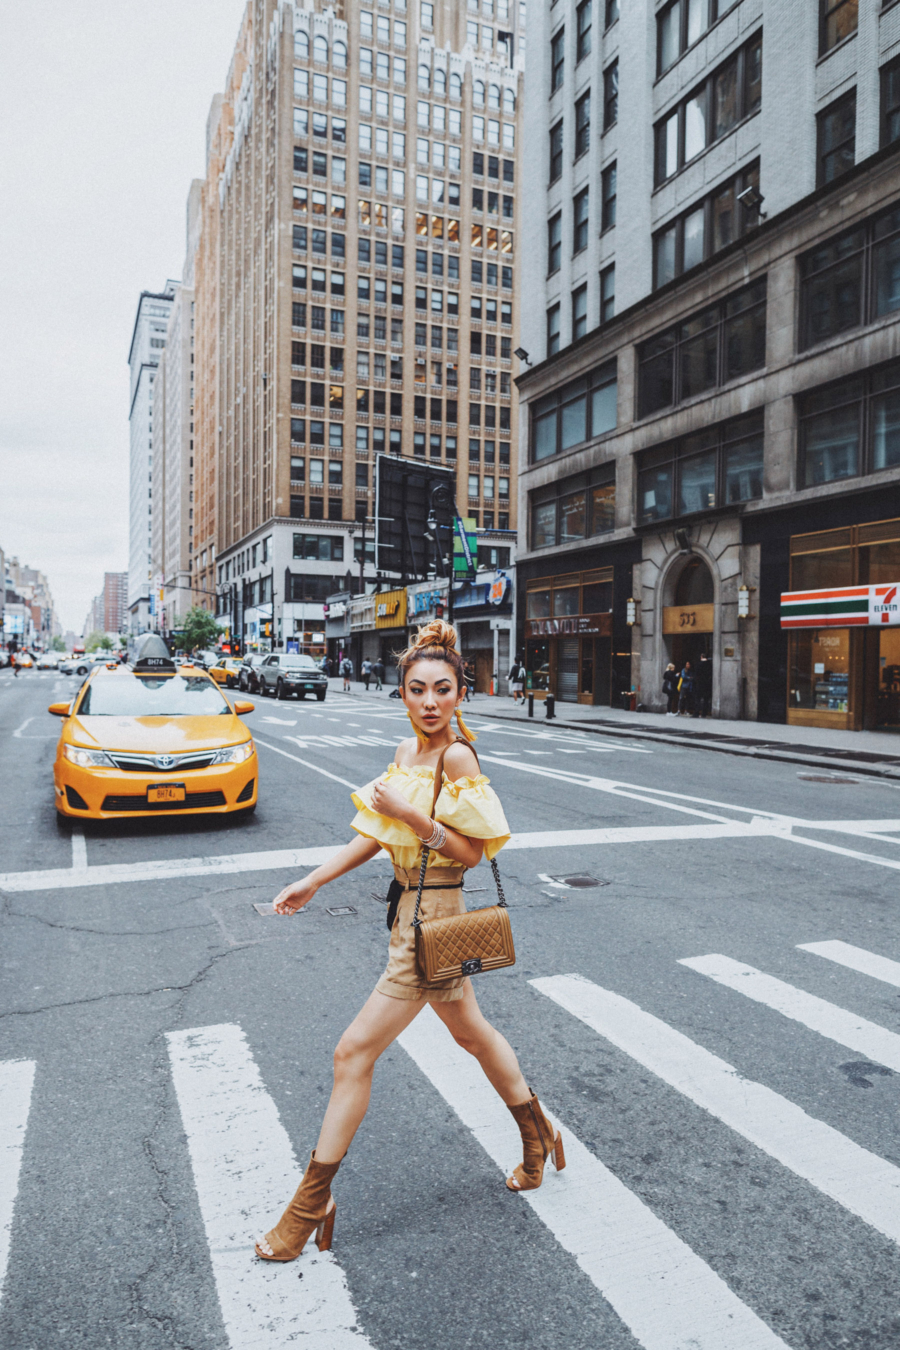 Yellow Top Streetstyle - The Garment District Comes to Life Again // Notjessfashion.com